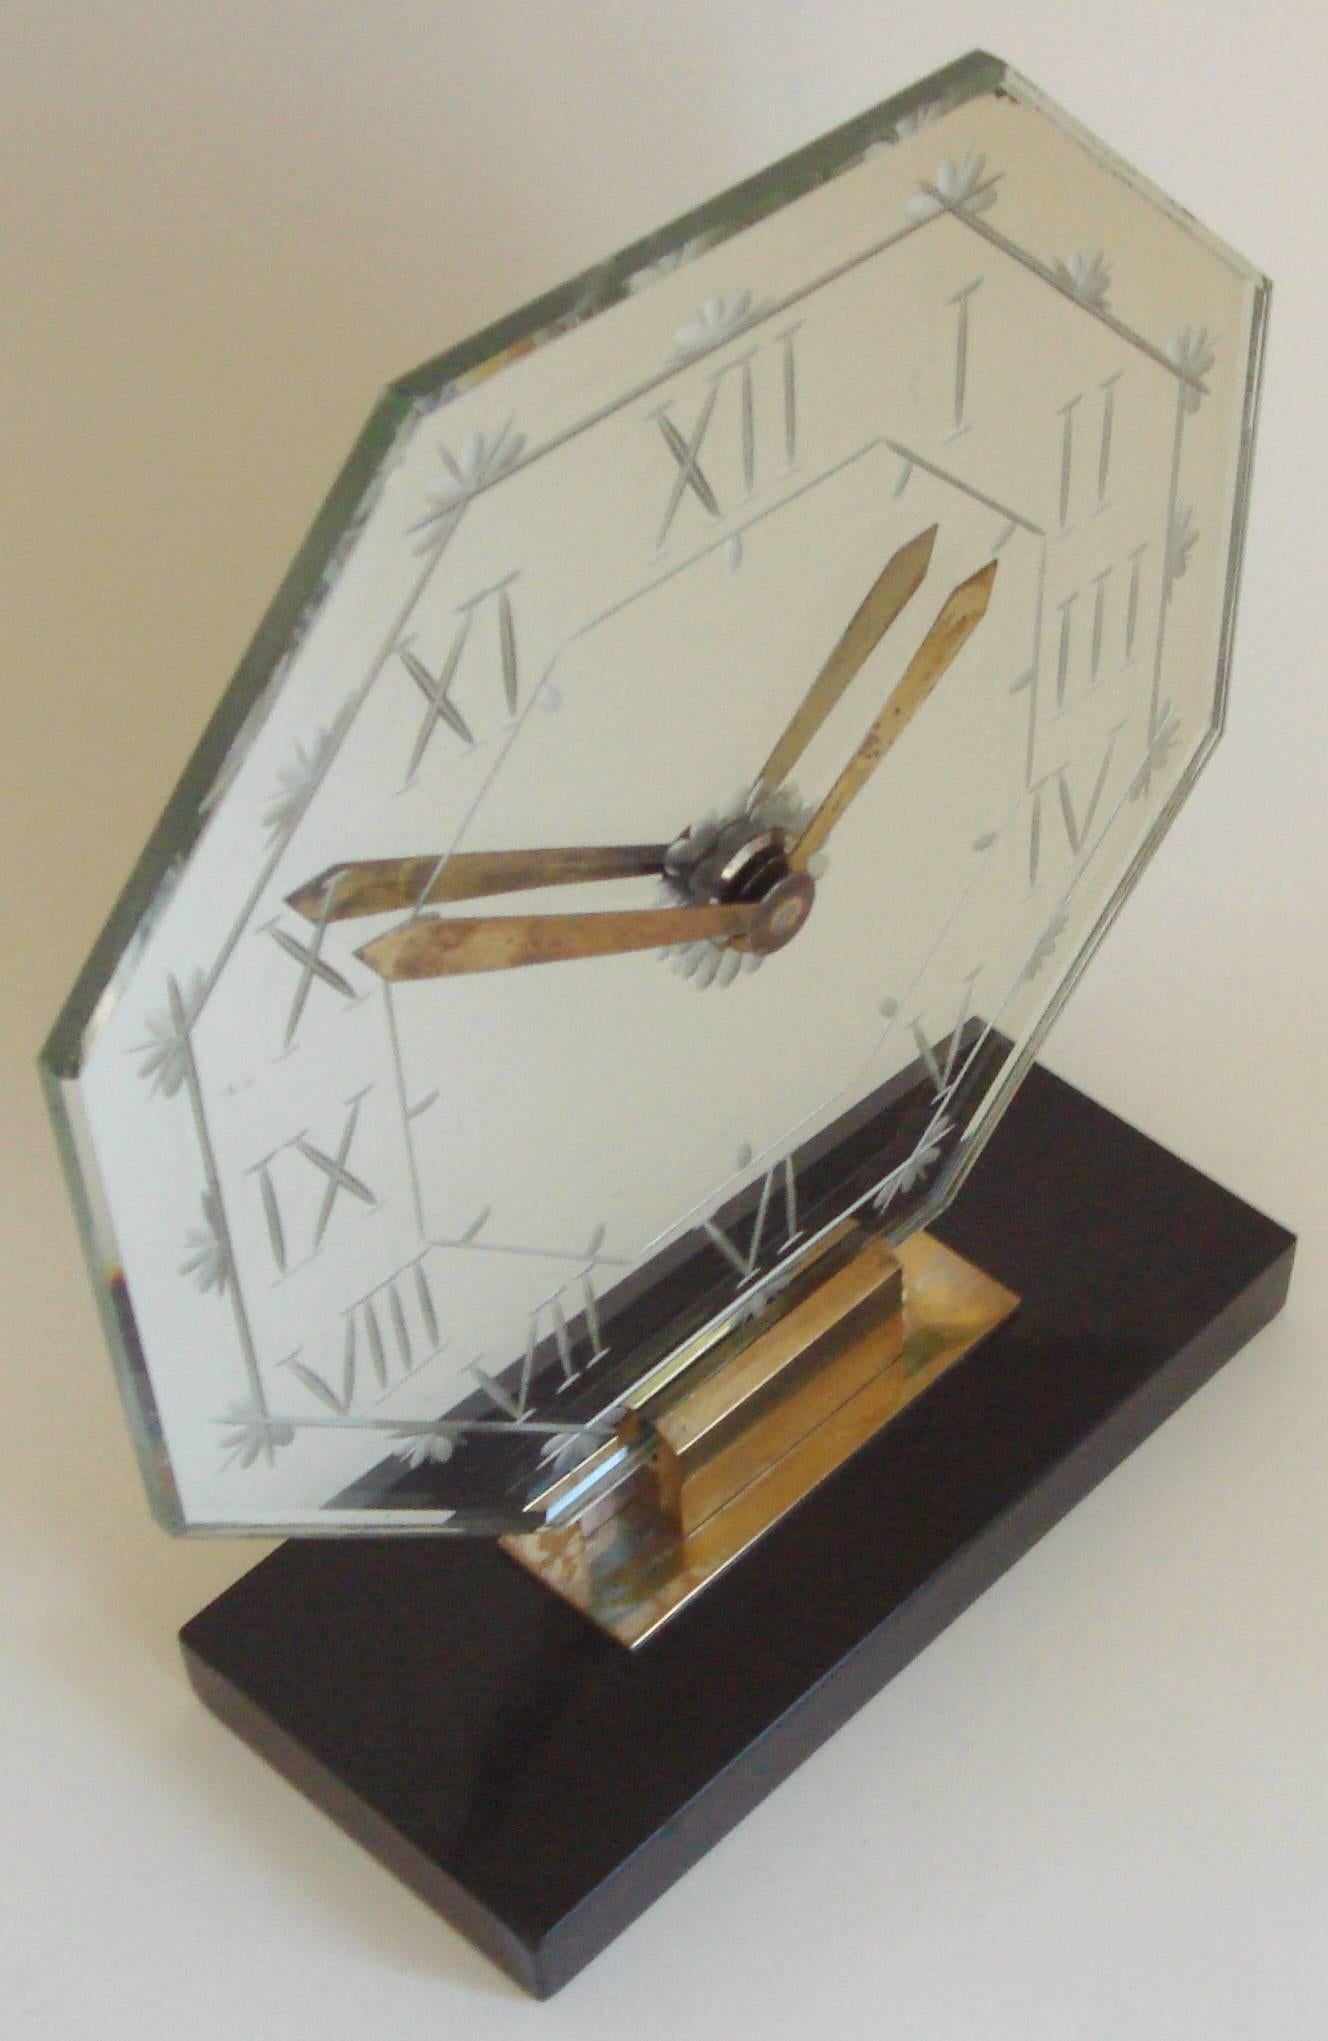 This stunning Art Deco eight-day, mechanical mantel clock is by the famed French clockmaker, Marti. It features an octagonal mirror face with wheel-cut Roman numerals and stylized cornflower designs. It has geometric brass hands emanating from an